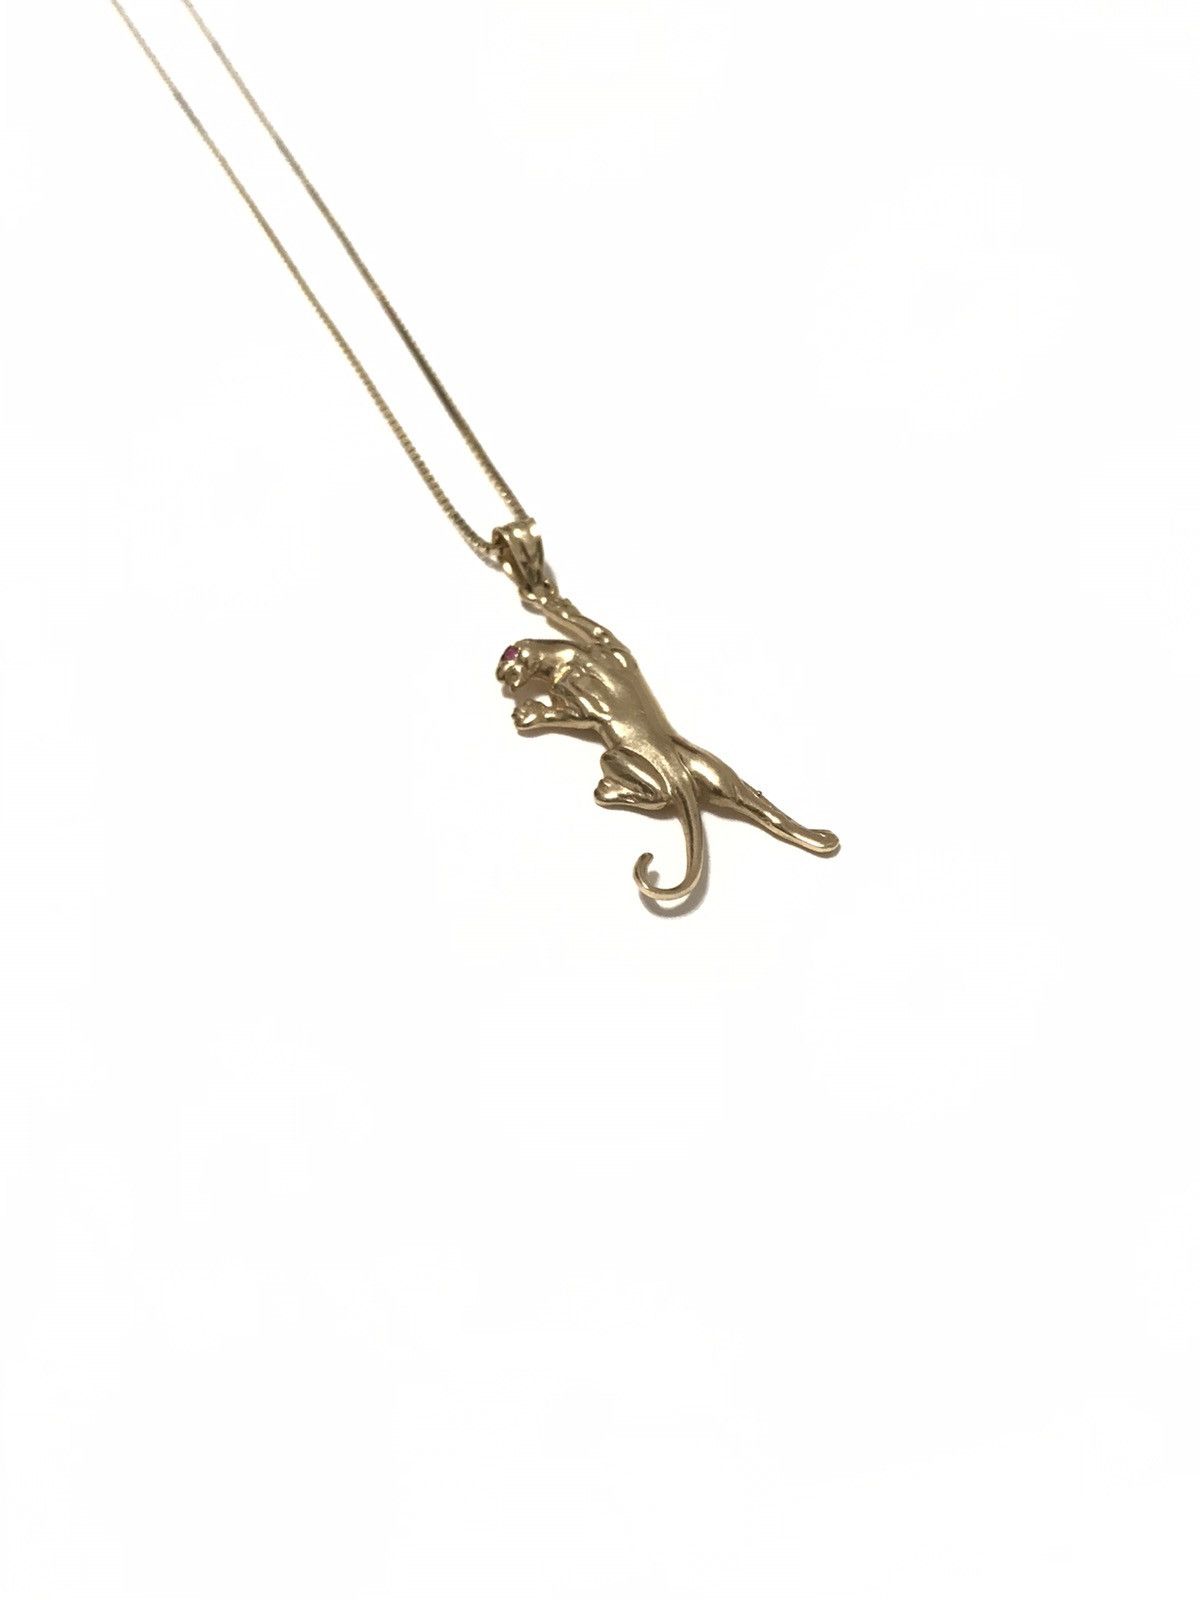 Supreme Panther Gold Necklace 14Ktrapfashion - ネックレス